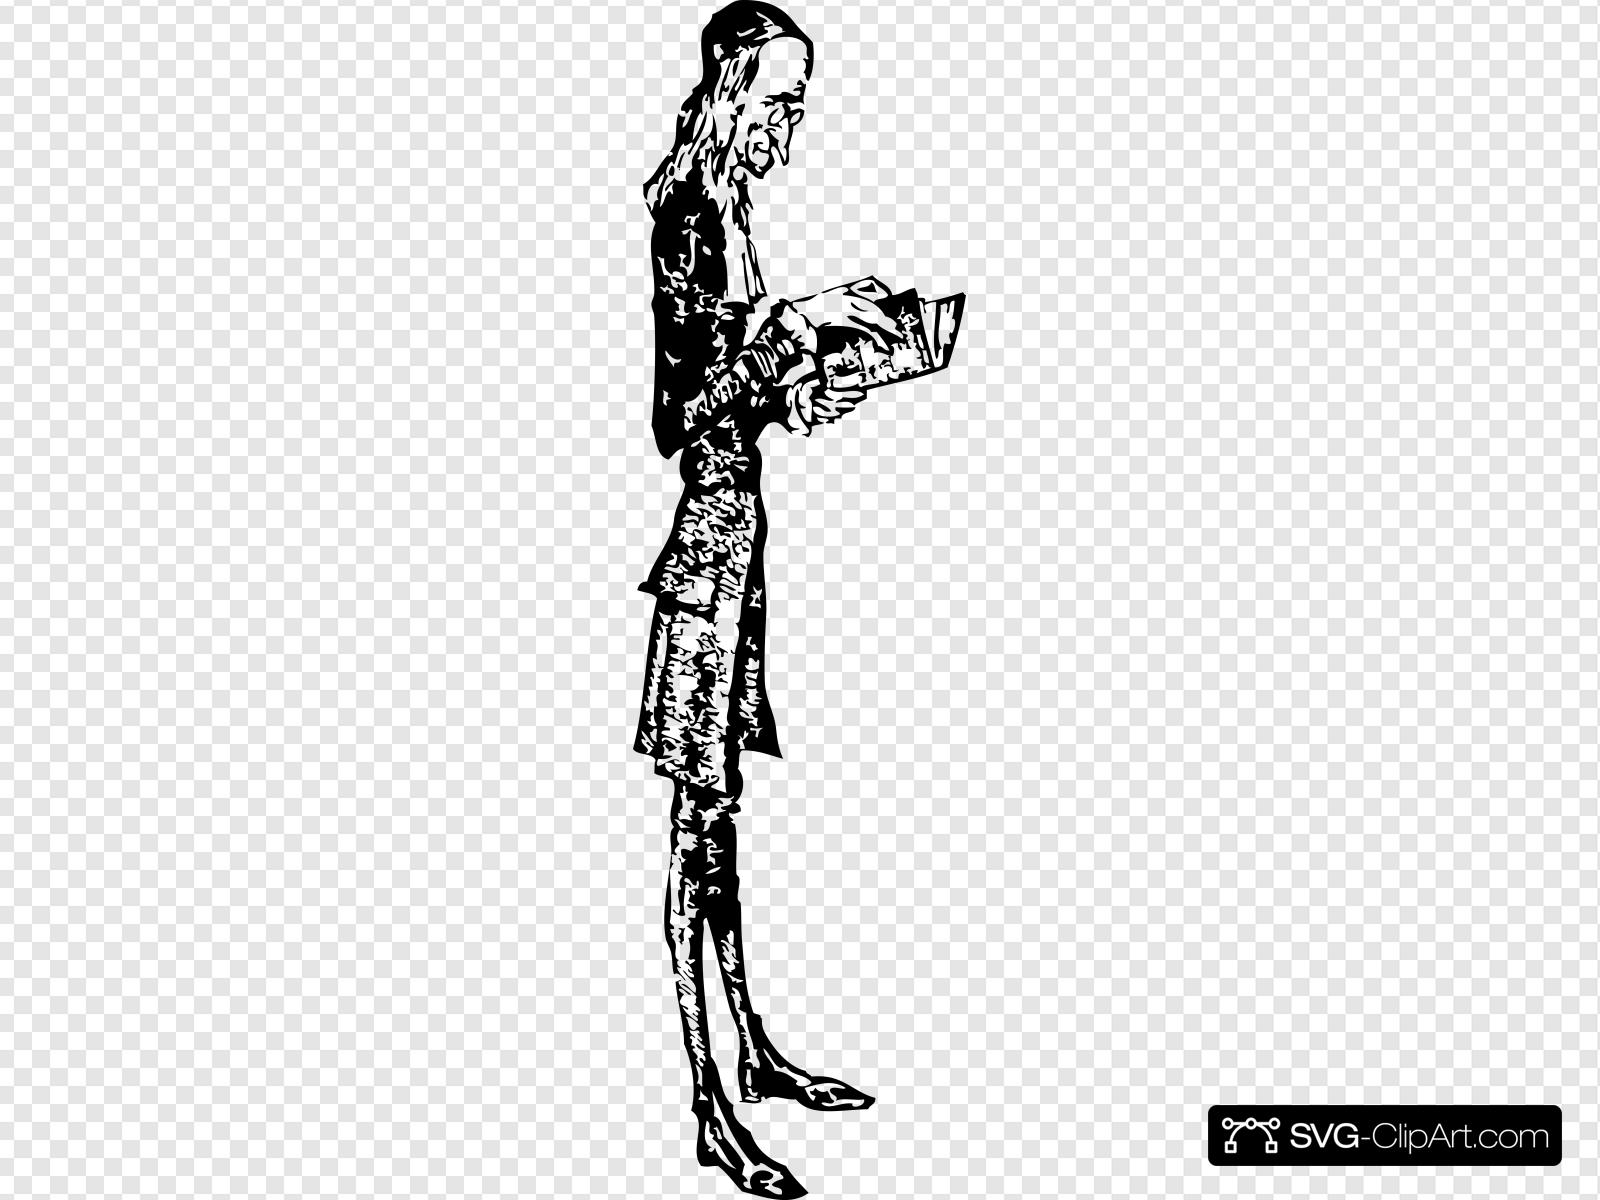 Skinny Man Reading Clip art, Icon and SVG.